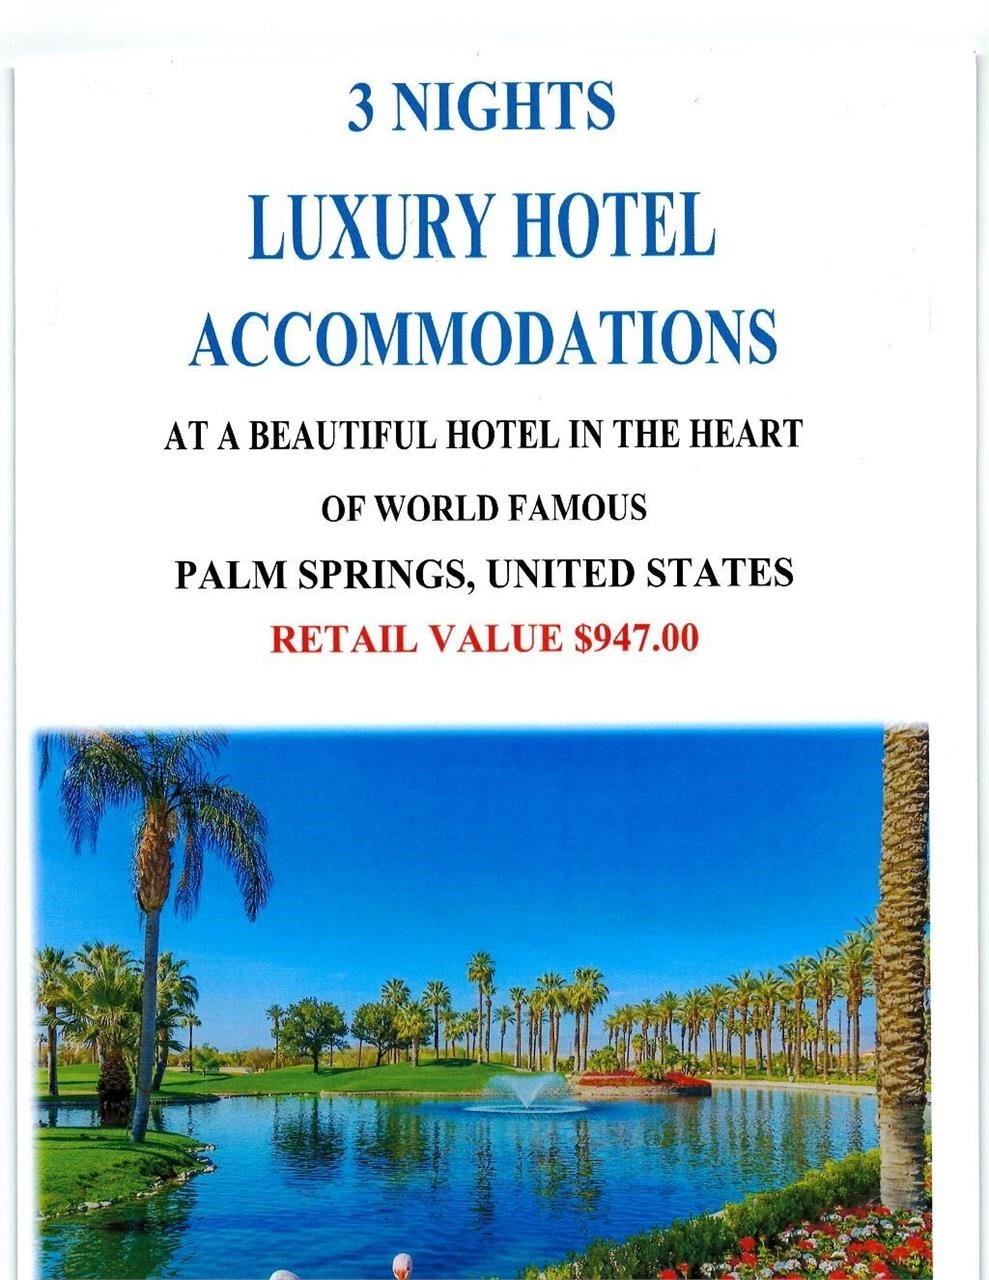 MAY 23RD. Vacation Hotel Accommodation Packages Auction